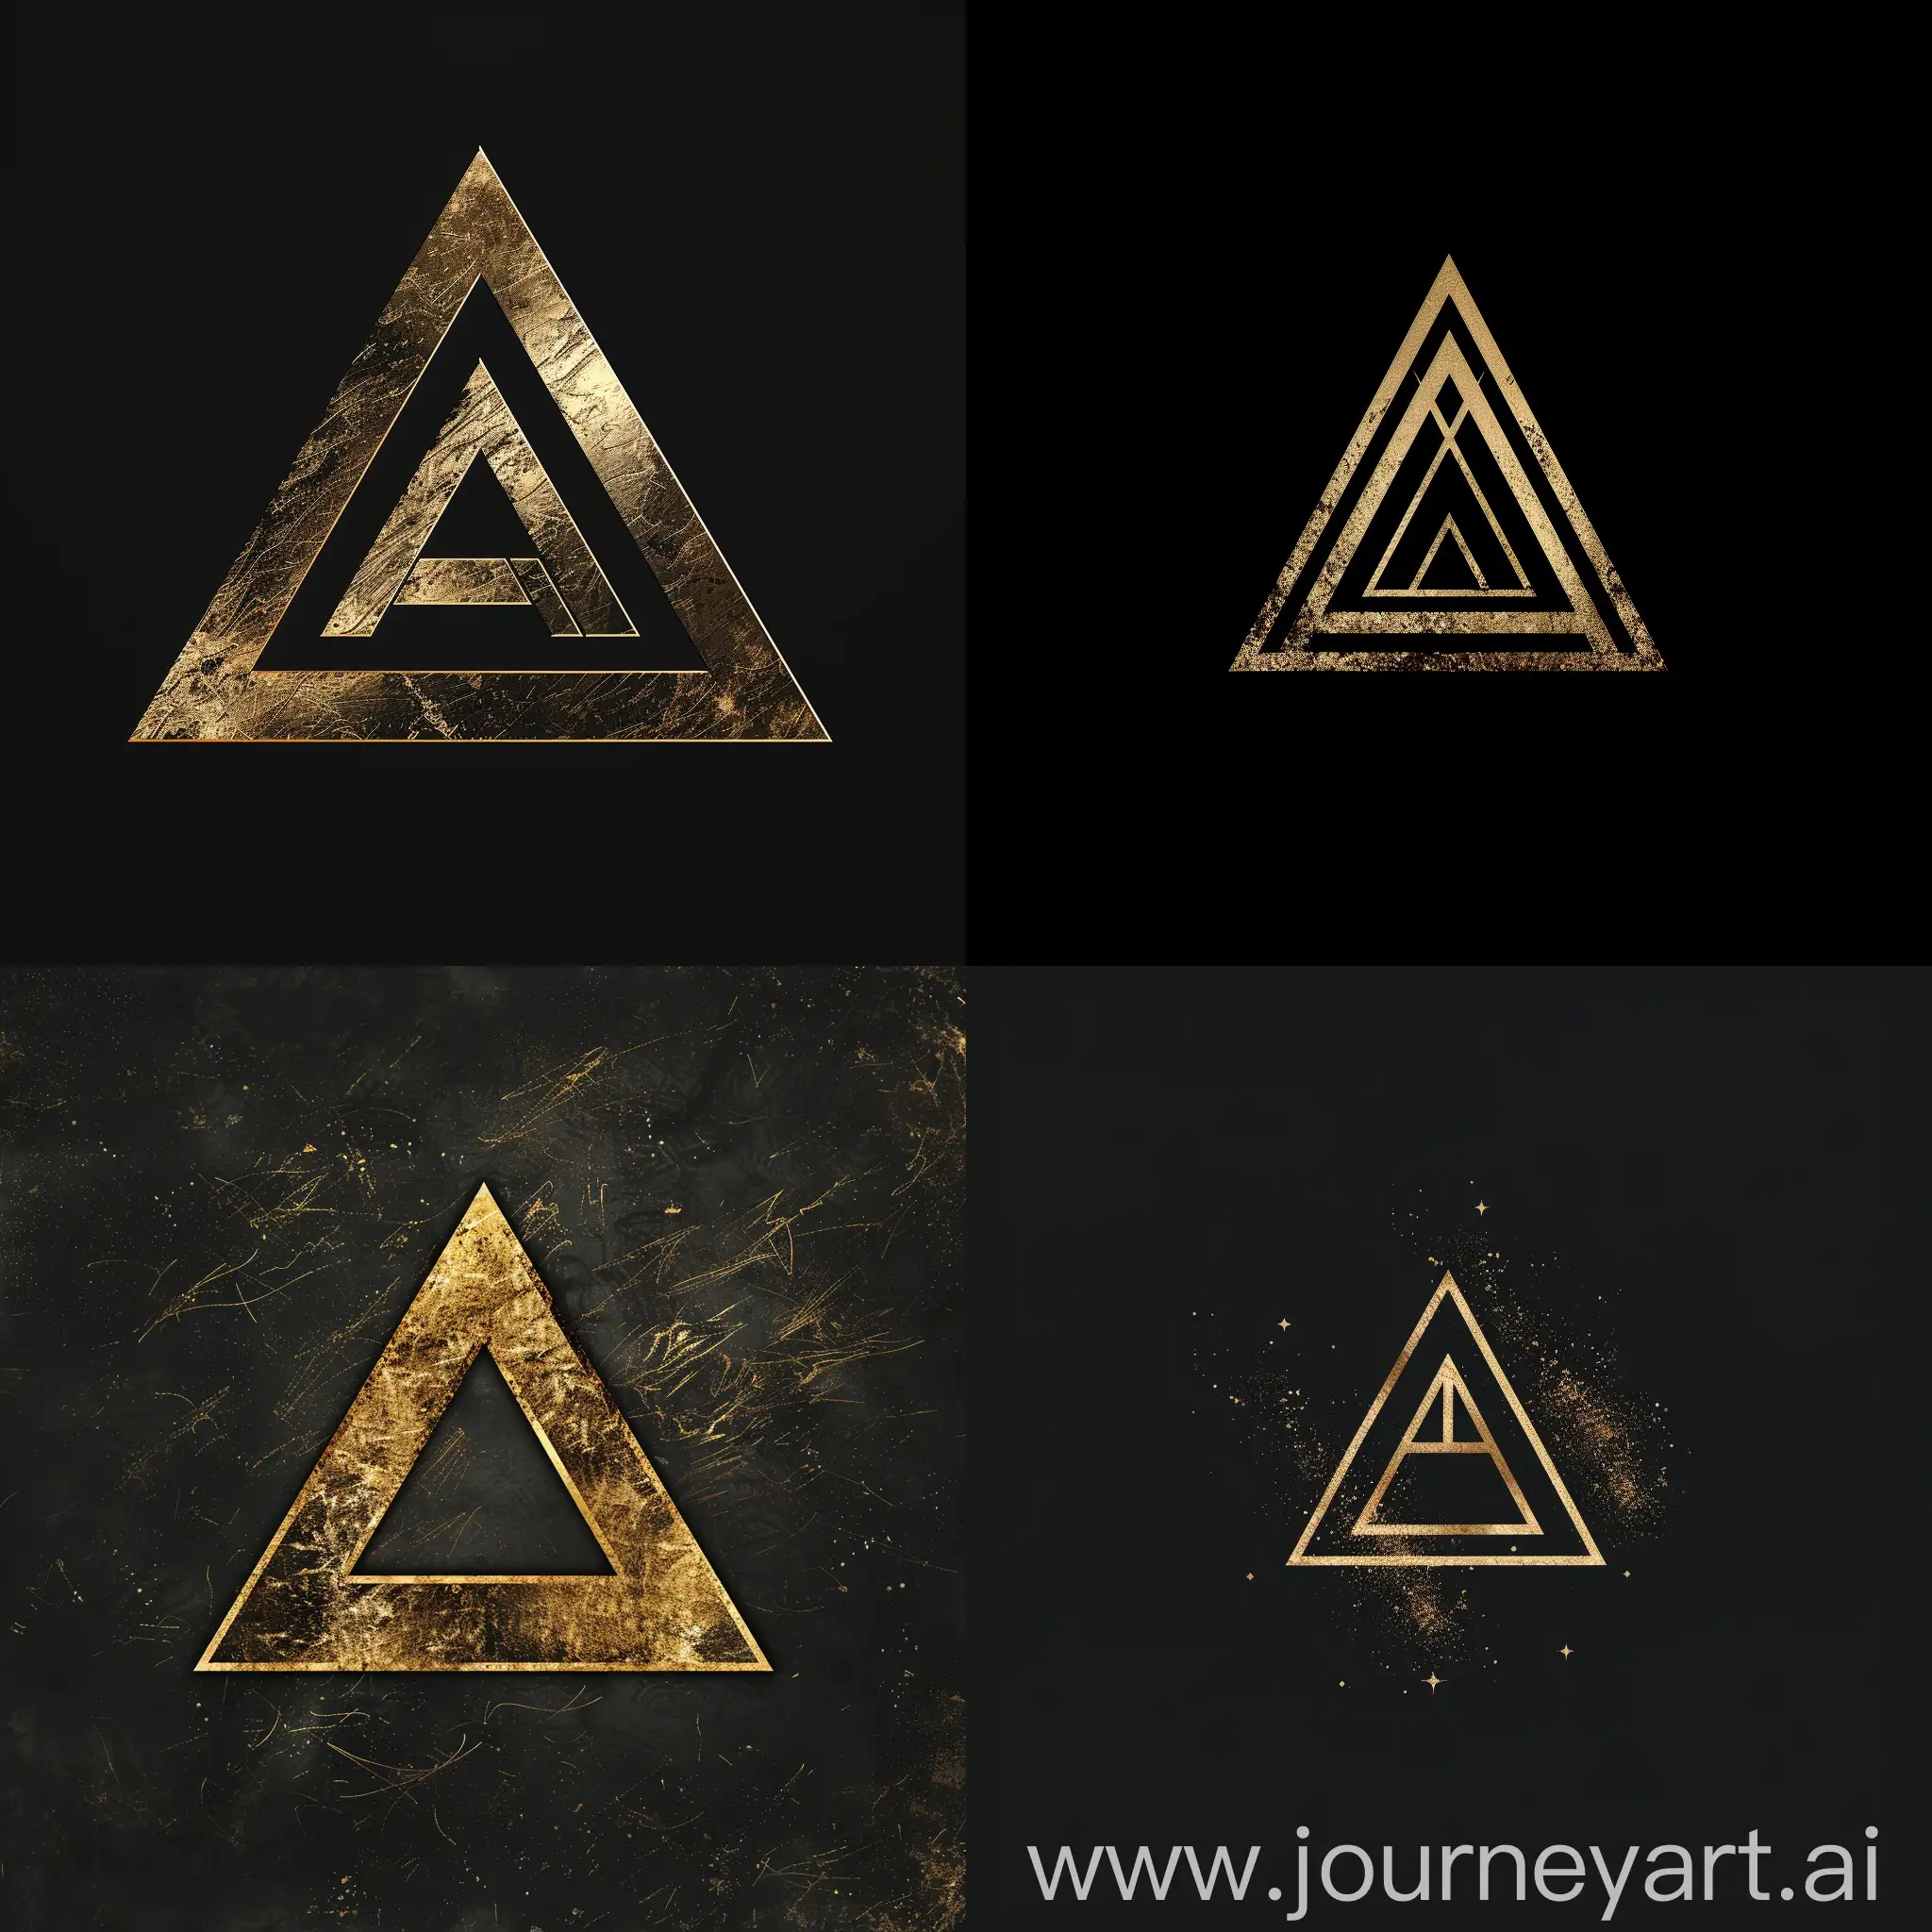 Typography, for "Akash".
Expression, feeling and appearance characteristics of the logo: triangular format, serif letters, gold, luxury, a combination of hard and strong, using the "Harry Potter" typography design pattern from the Harry Potter movie.
More information: Akash means: power, glory, management and kindness.
Akash: The brand and stage name of a pop singer.